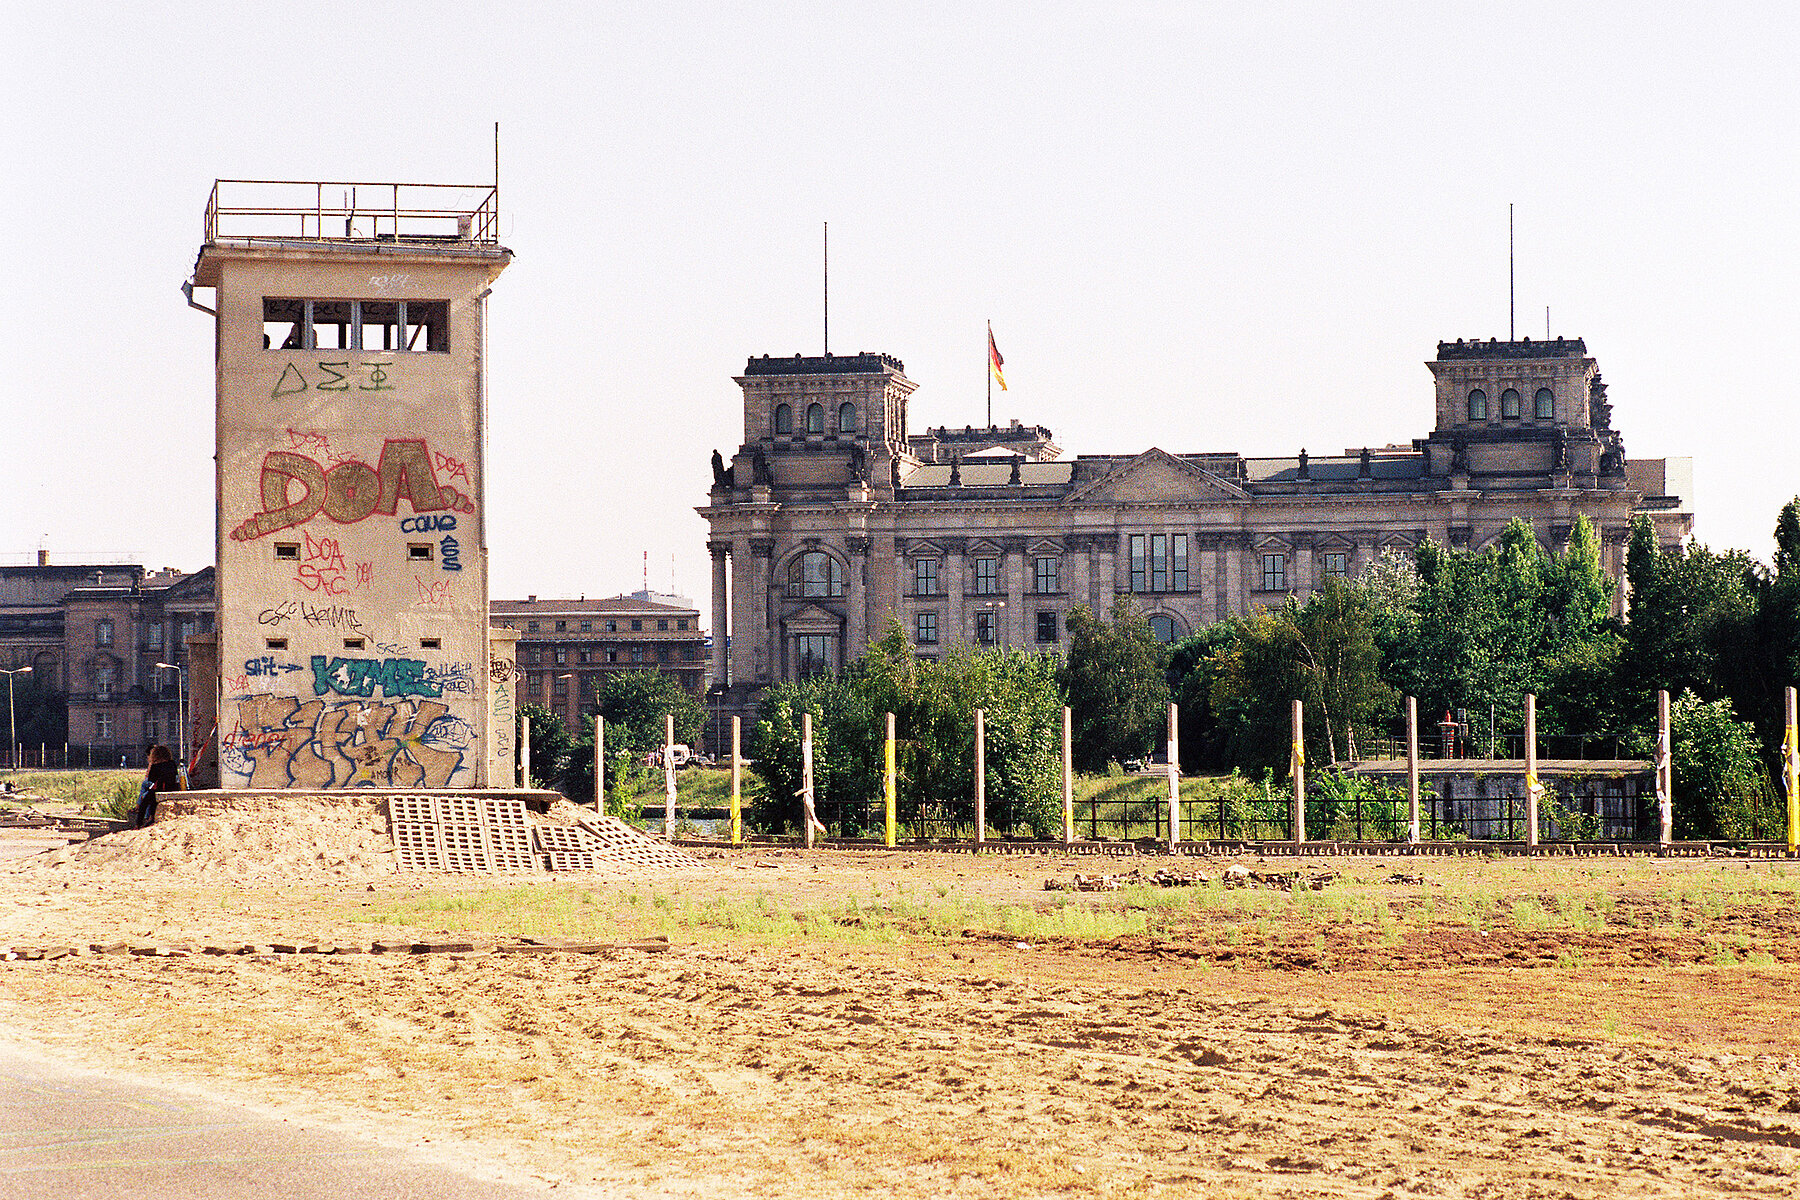 On the left is an abandoned watch tower of the Berlin Wall, behind it the Spree and the Reichstag building.